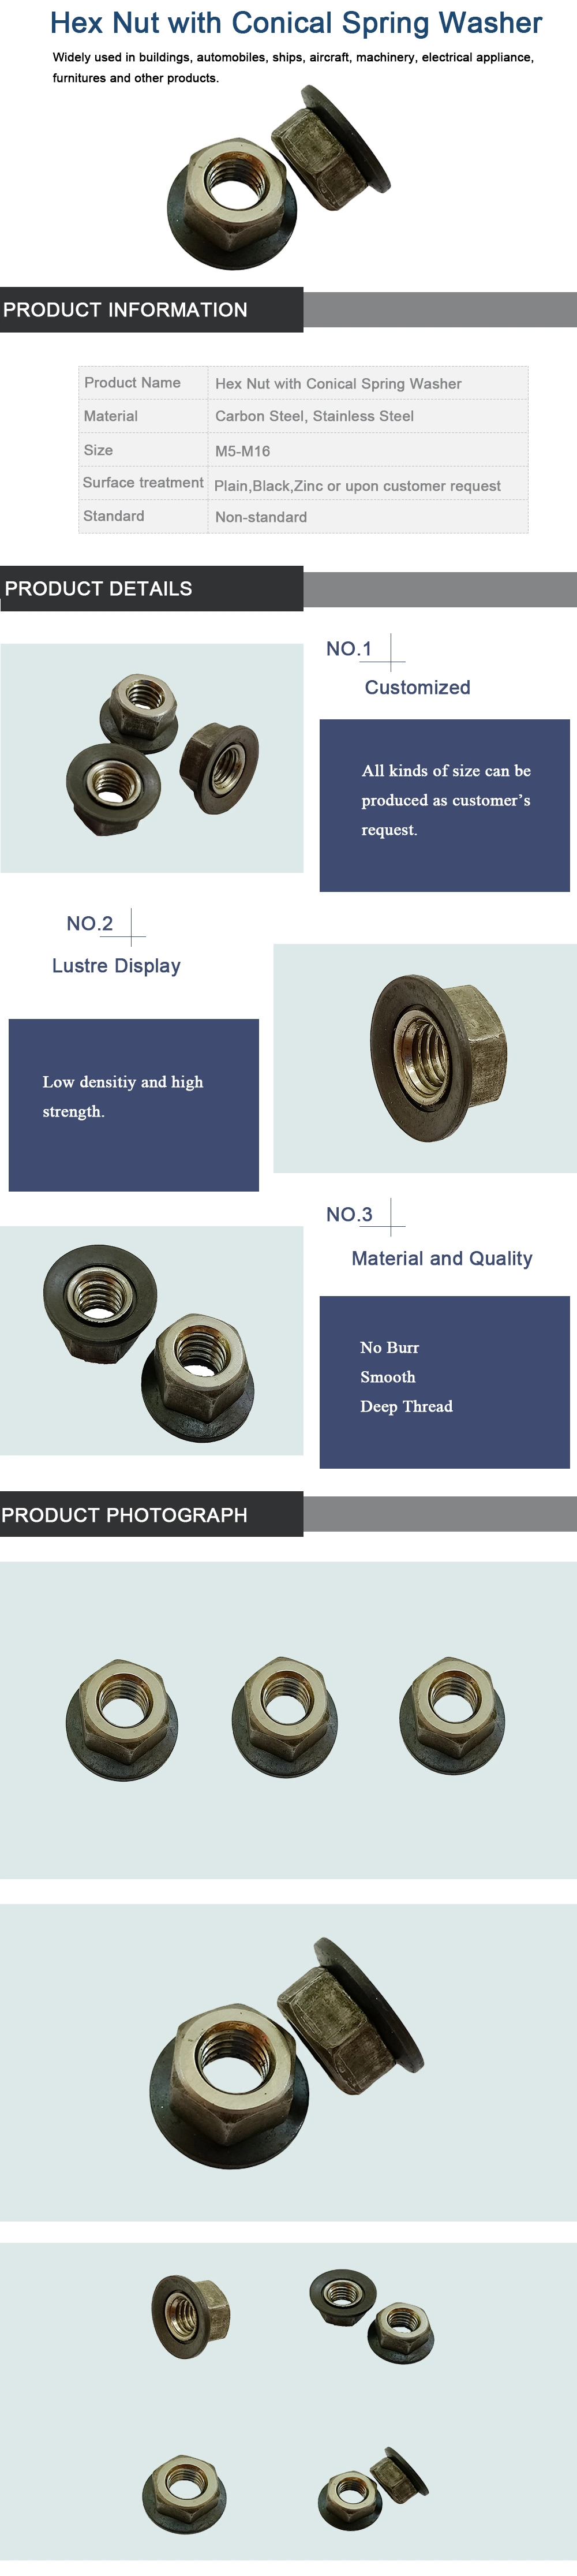 High Quality Carbon Steel Customized Hexagon Nuts Steel Nut Step Nut Furniture Nut Lock Nut Rivet Nut Flange Nut Cap Nut with Conical Spring Washer